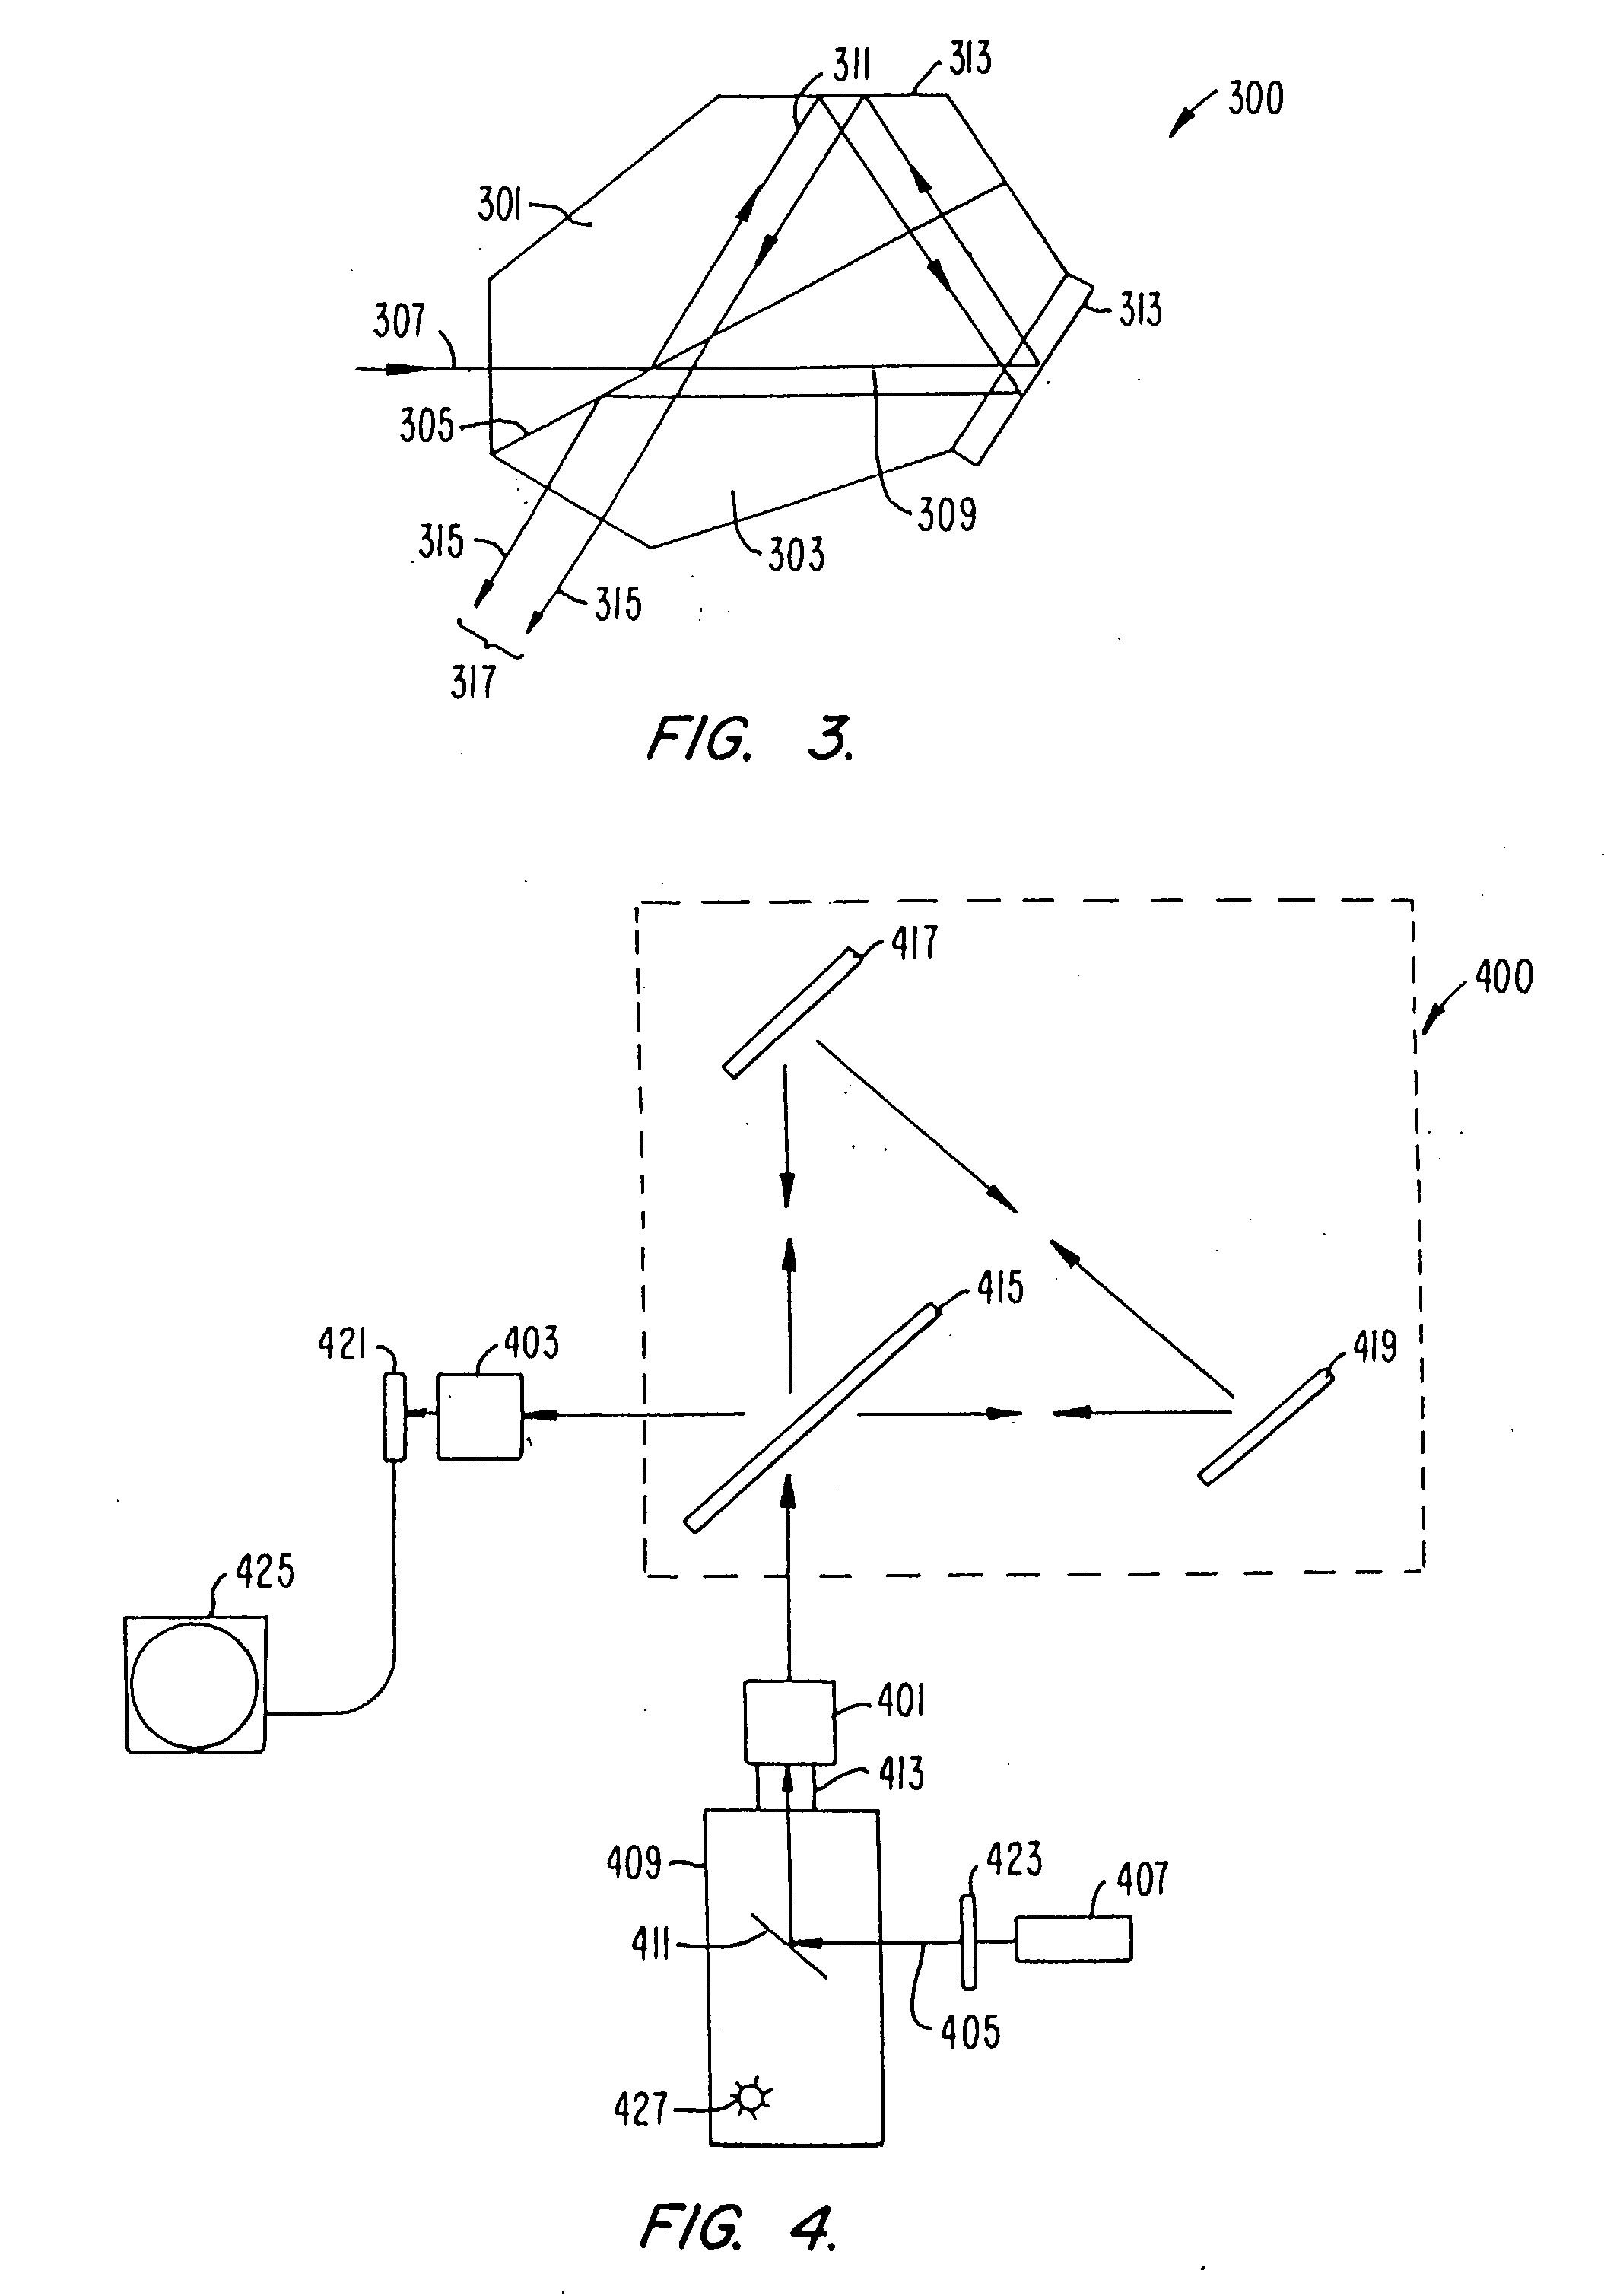 Spectral imaging apparatus and methodology